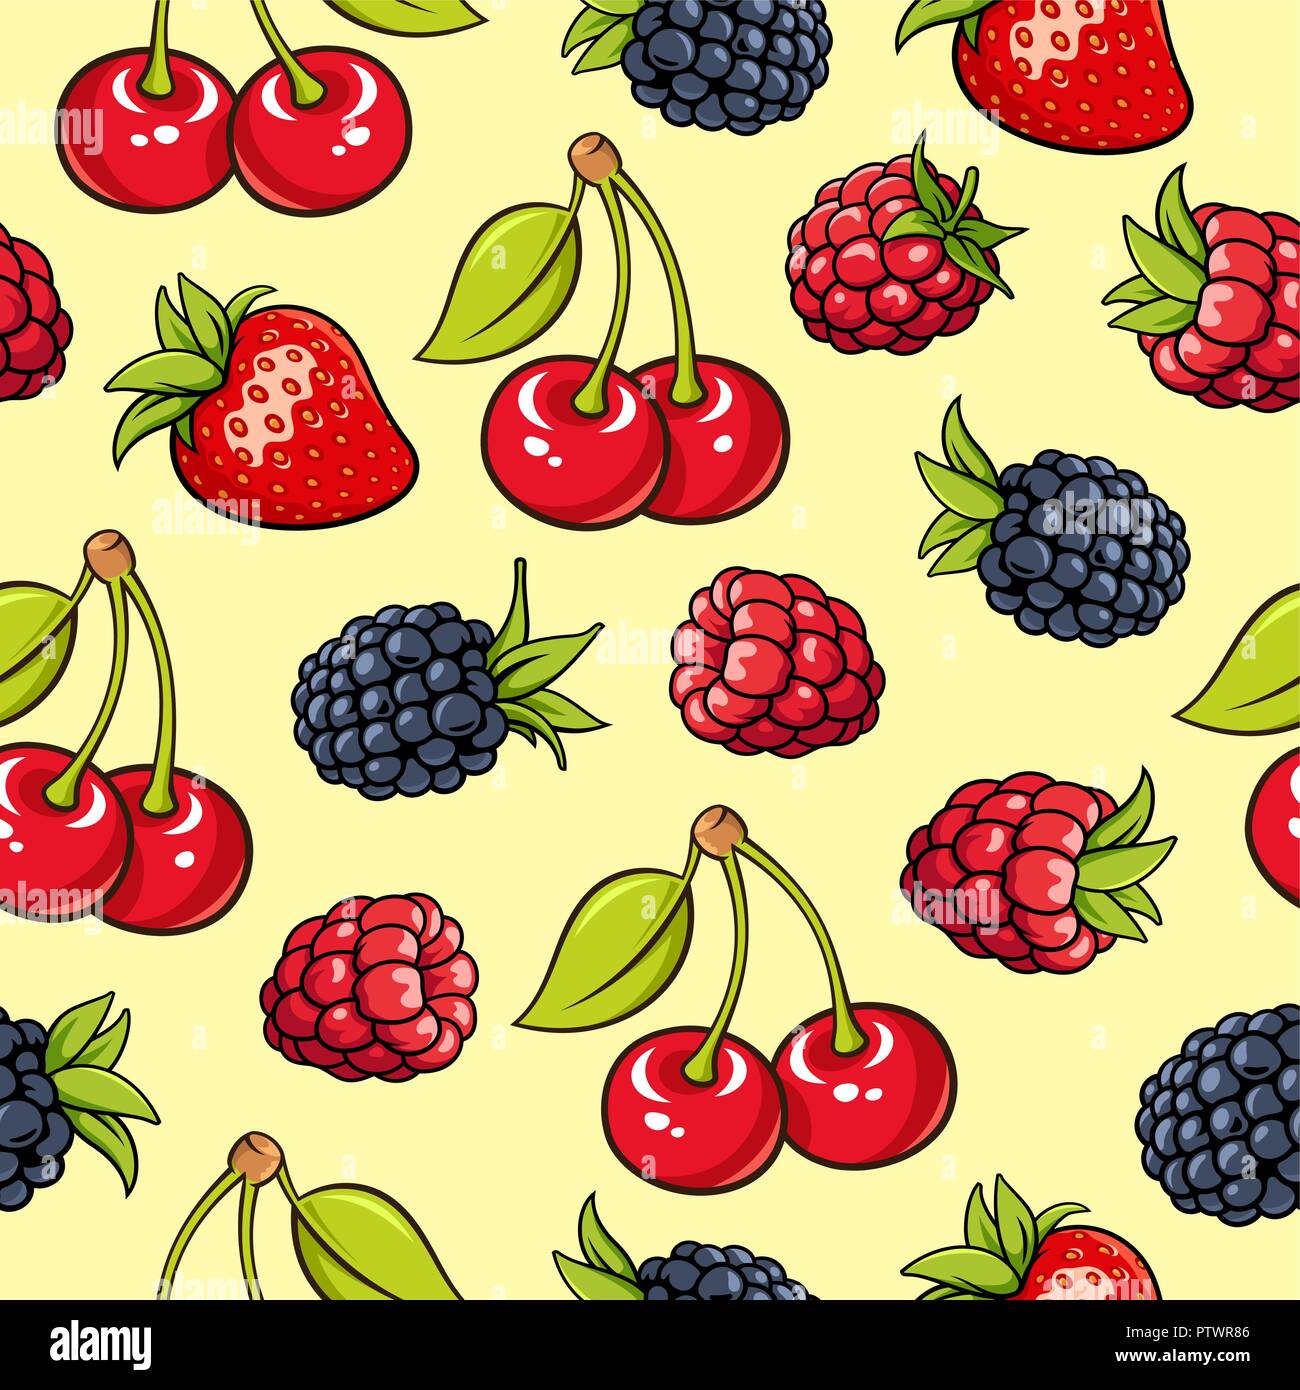 Seamless background with strawberry, blackberry, raspberry, cherry. Garden berries on yellow backdrop. Use as a pattern for fabric, web page backgroun Stock Vector